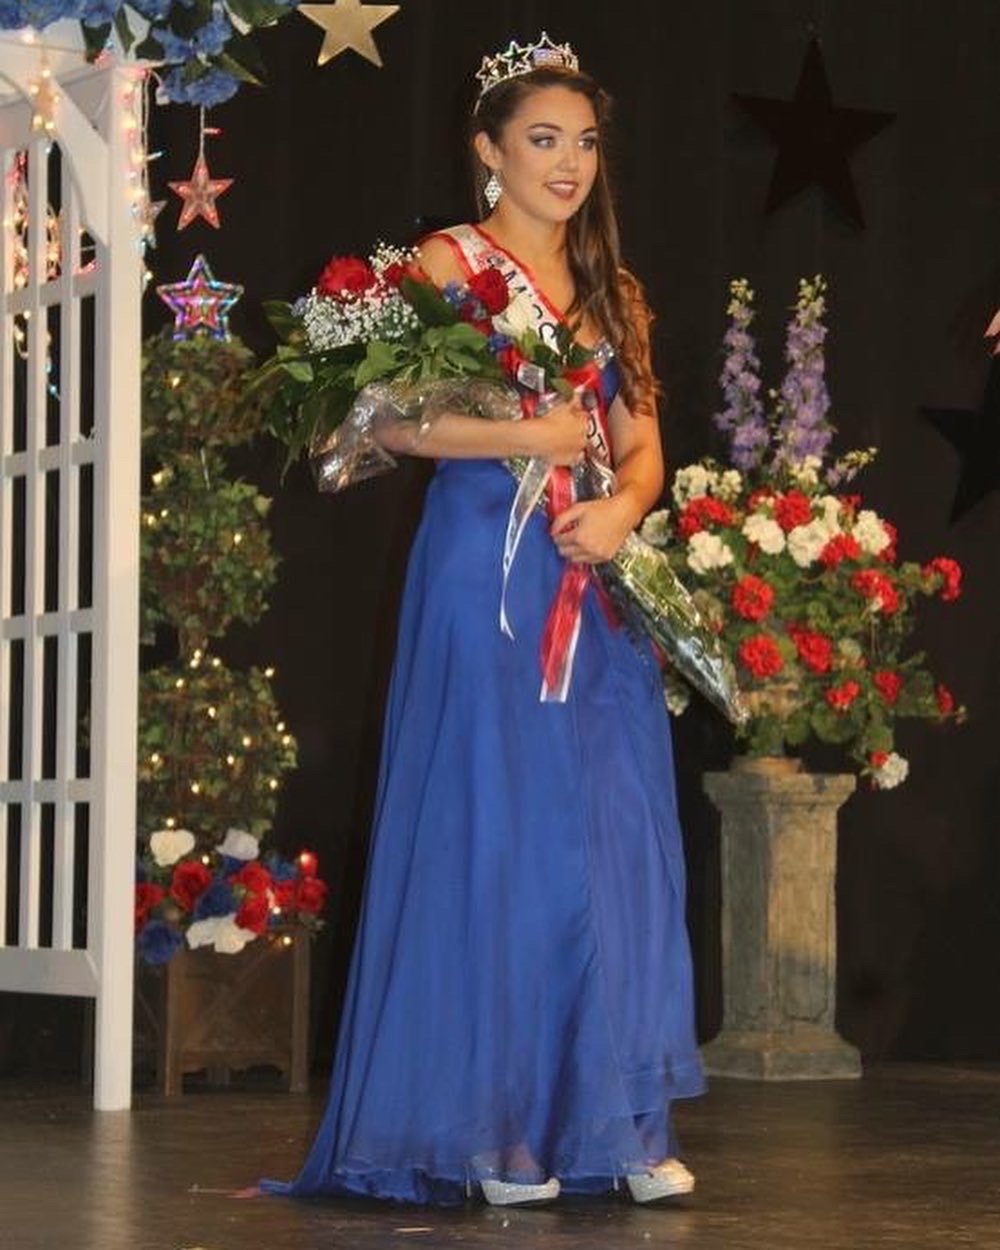 Samantha Golden, who won Miss Fourth of July in 2016, is will compete in a higher tier competition in the Miss Rhode Island pageant this weekend, Saturday and Sunday, to potentially go on to represent Rhode Island in the Miss USA pageant.